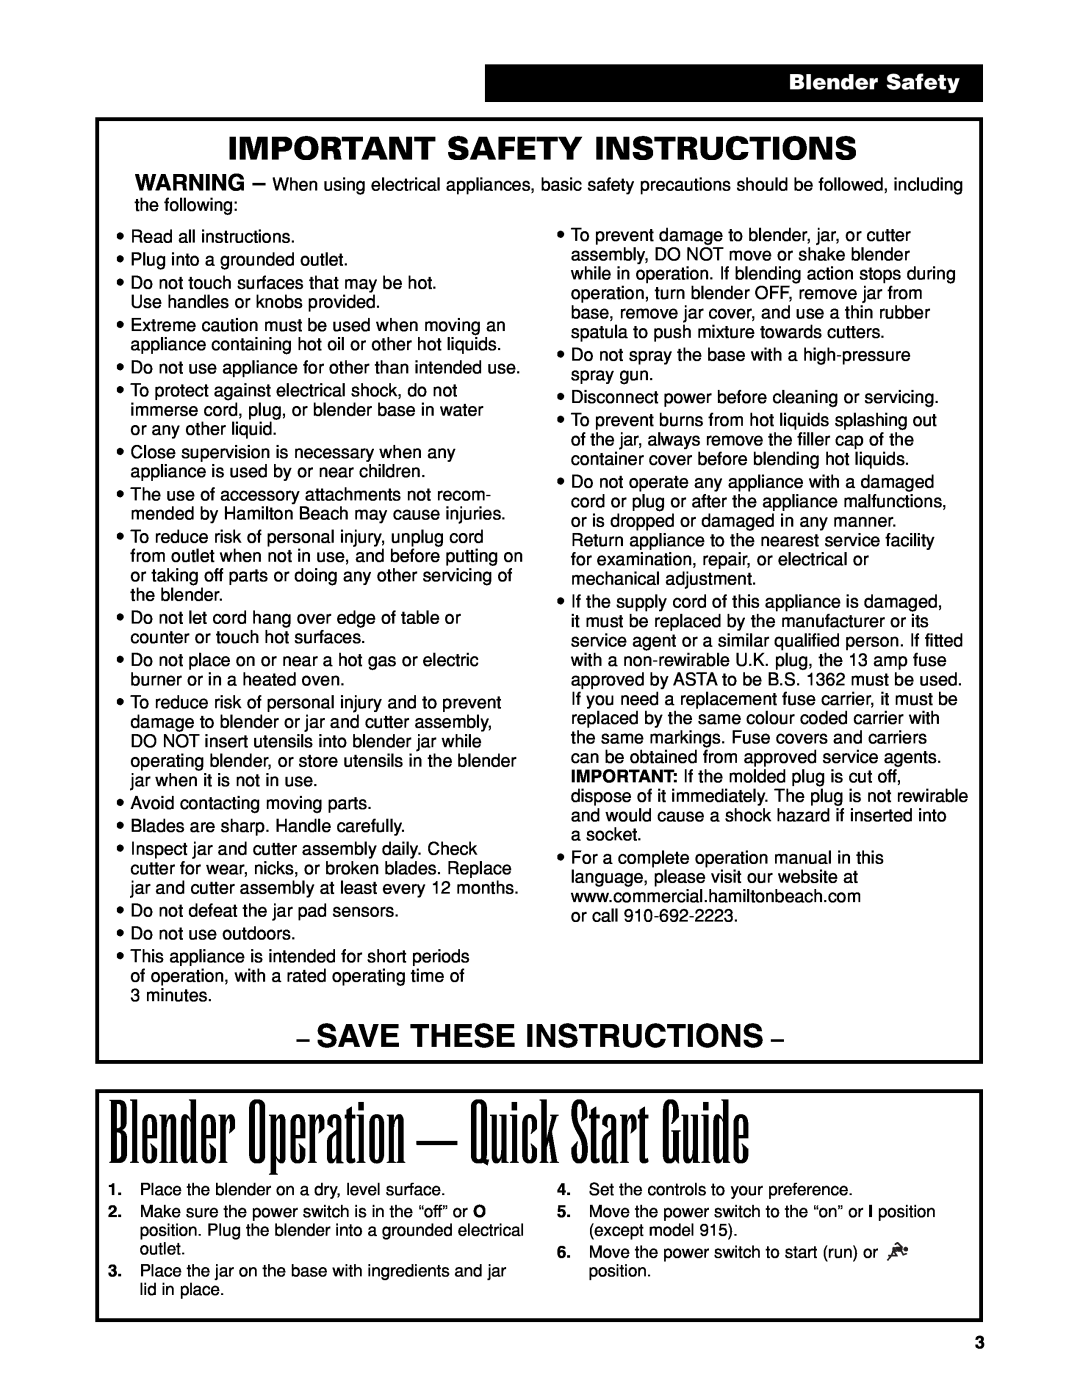 Hamilton Beach Tempest Series Blender Operation - Quick Start Guide, Important Safety Instructions, Blender Safety 